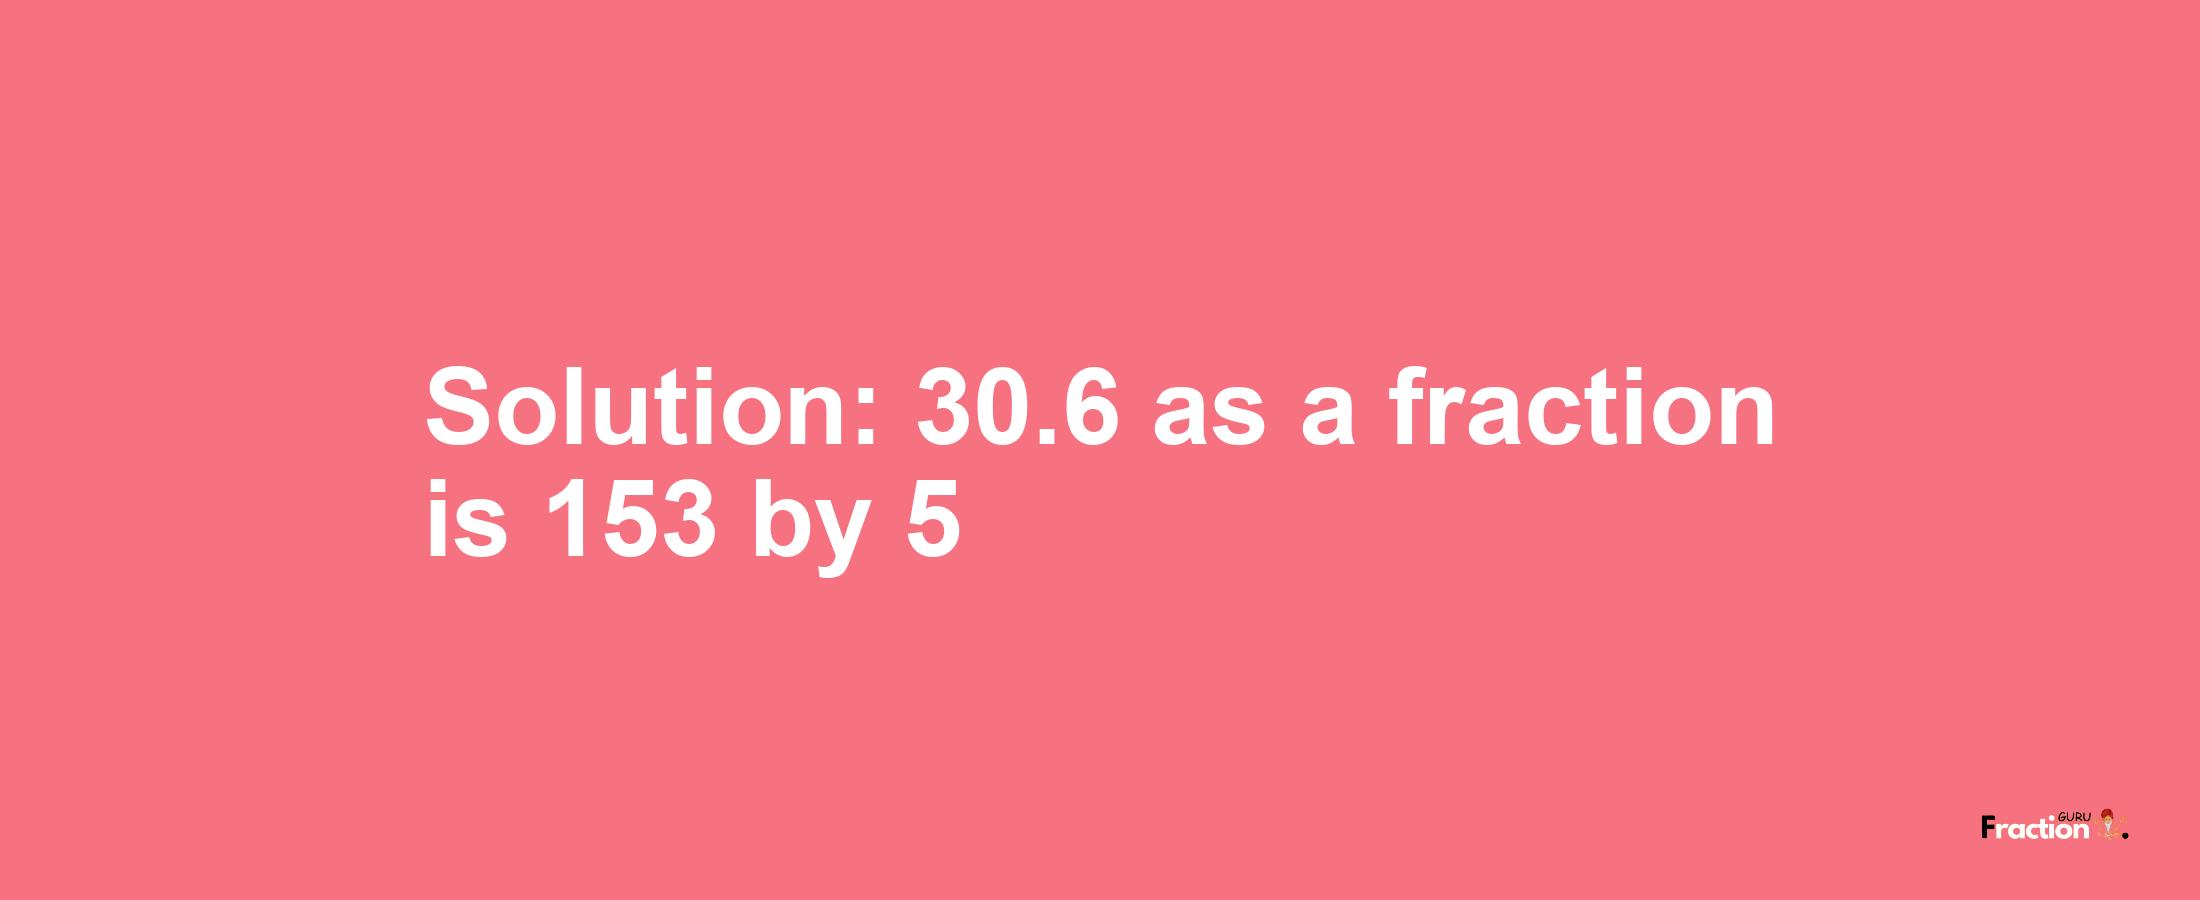 Solution:30.6 as a fraction is 153/5